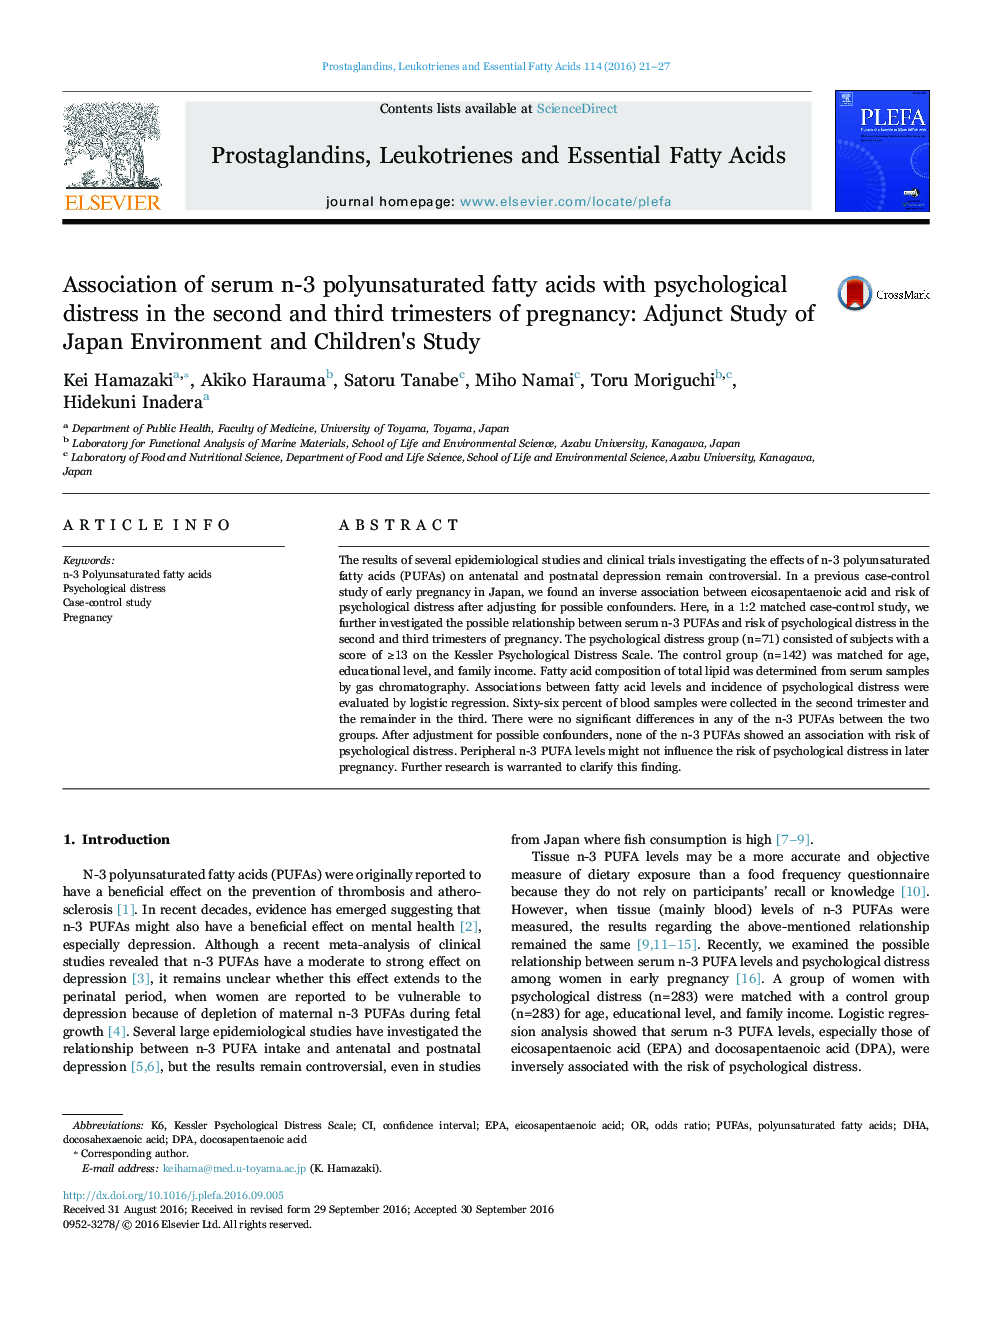 Association of serum n-3 polyunsaturated fatty acids with psychological distress in the second and third trimesters of pregnancy: Adjunct Study of Japan Environment and Children's Study